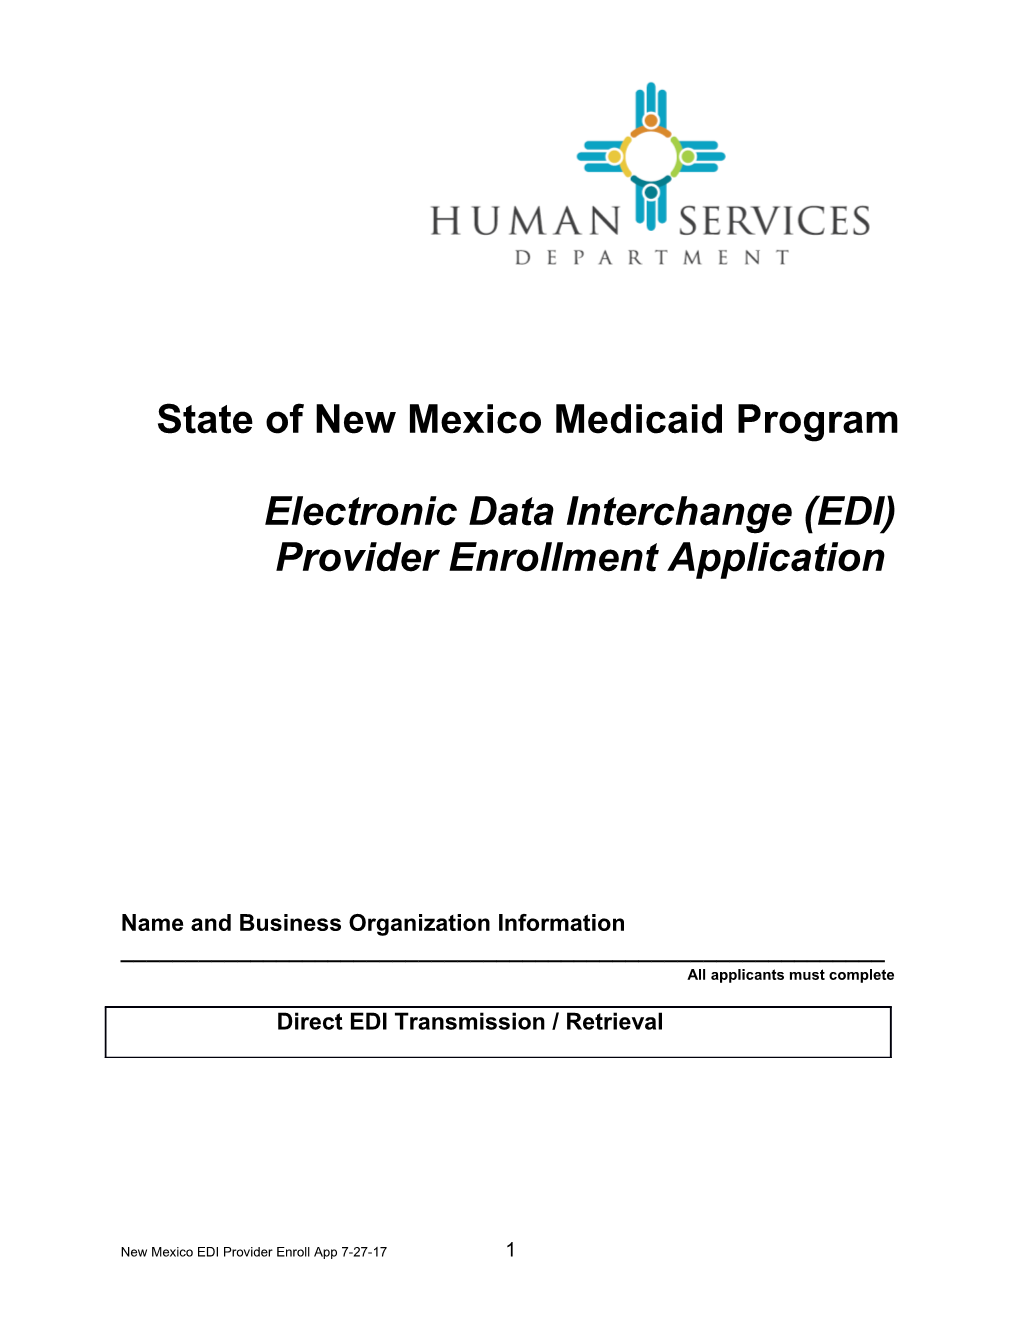 State of New Mexico Medicaid Program